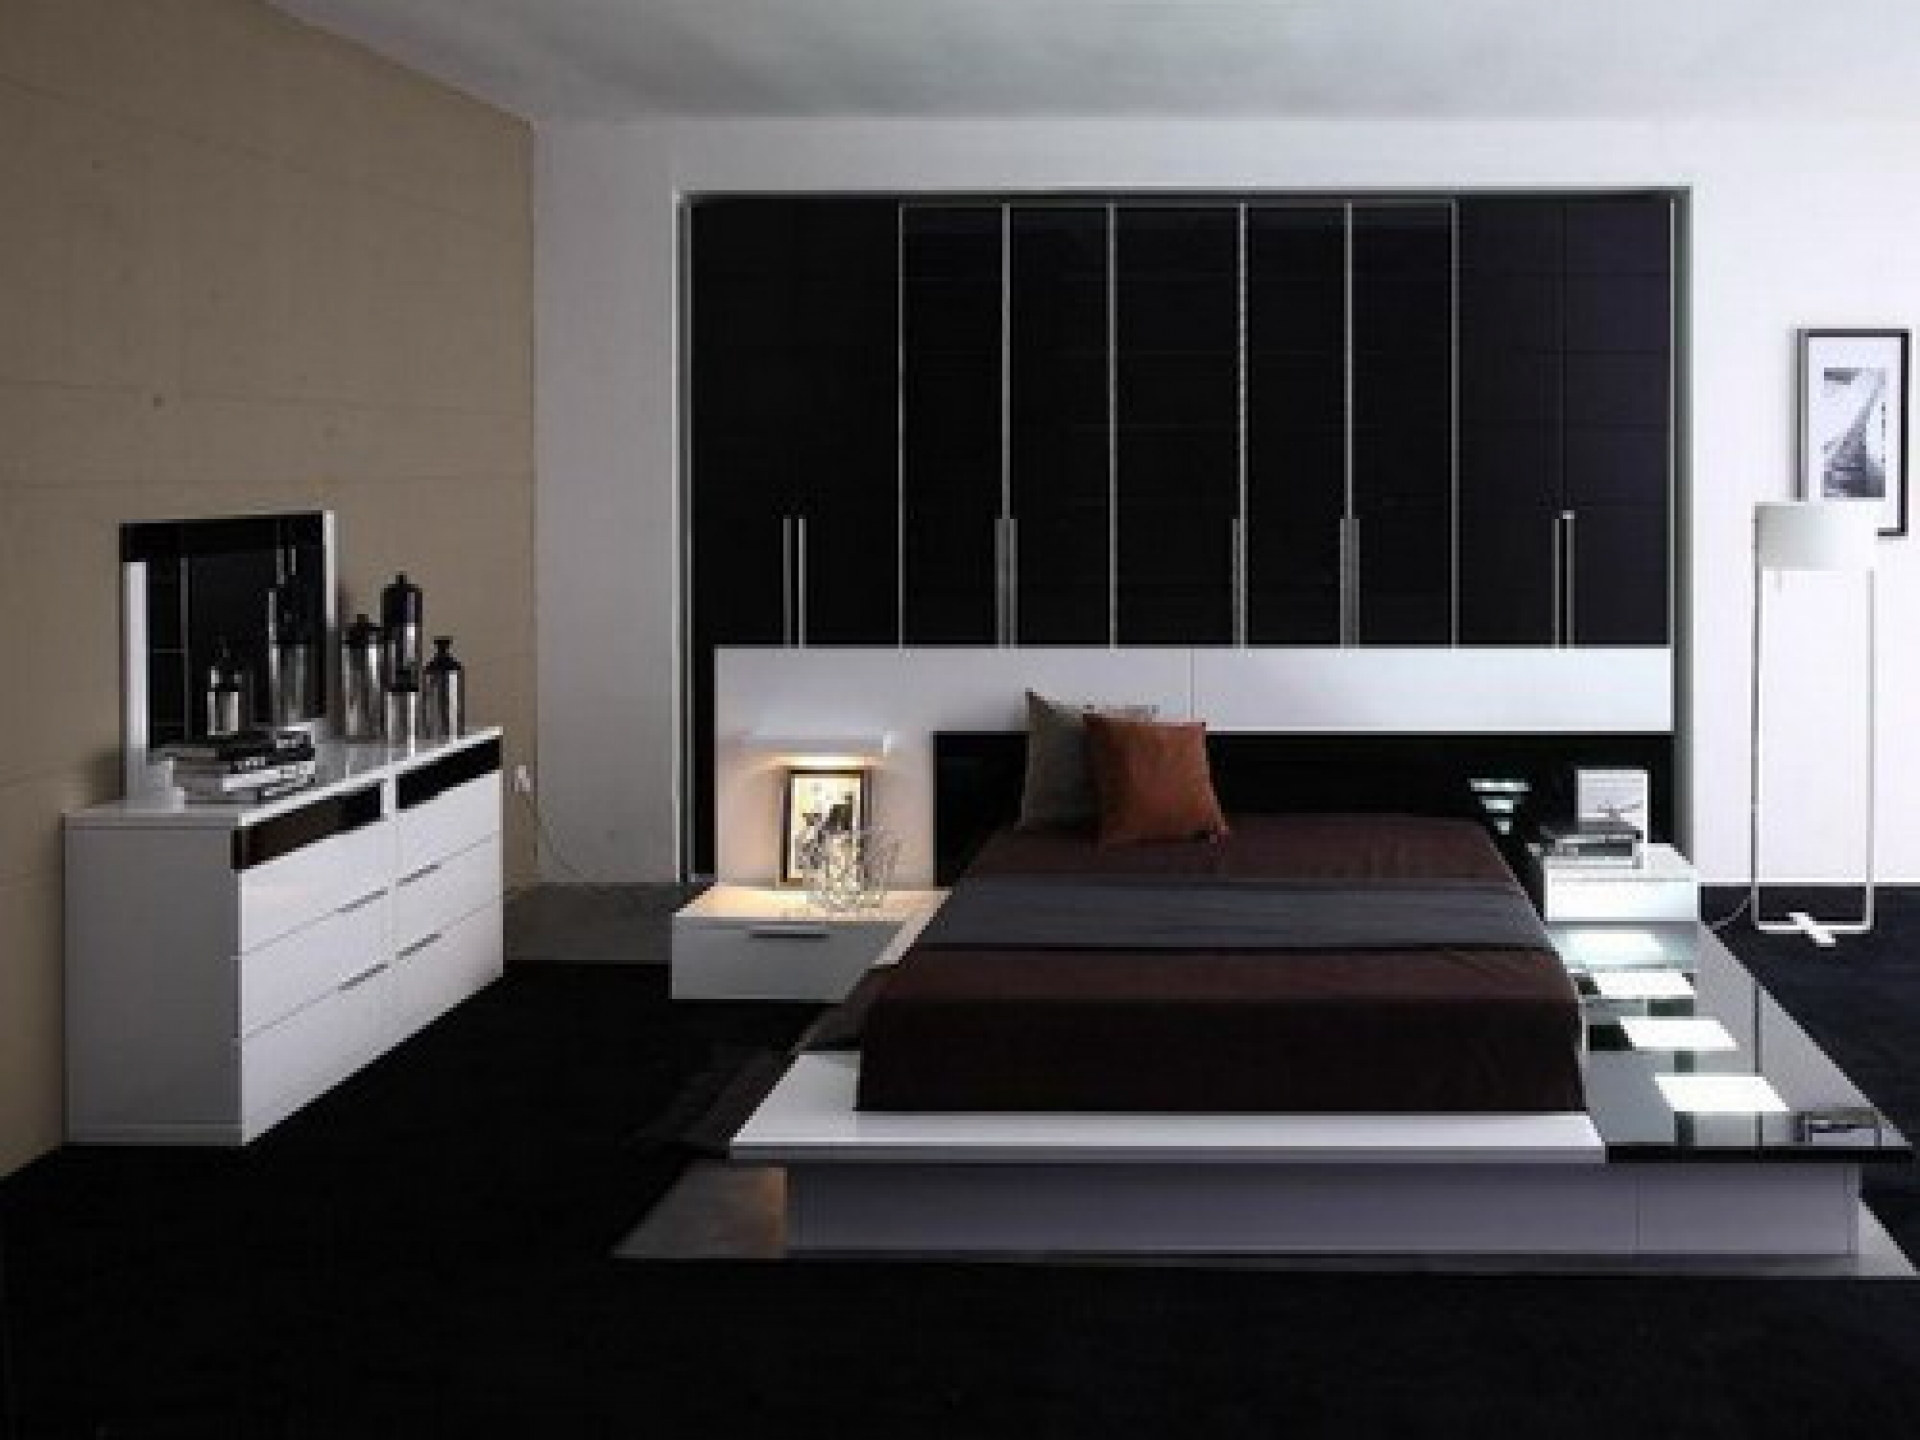 30 Contemporary Bedroom Design For Your Home – The WoW Style